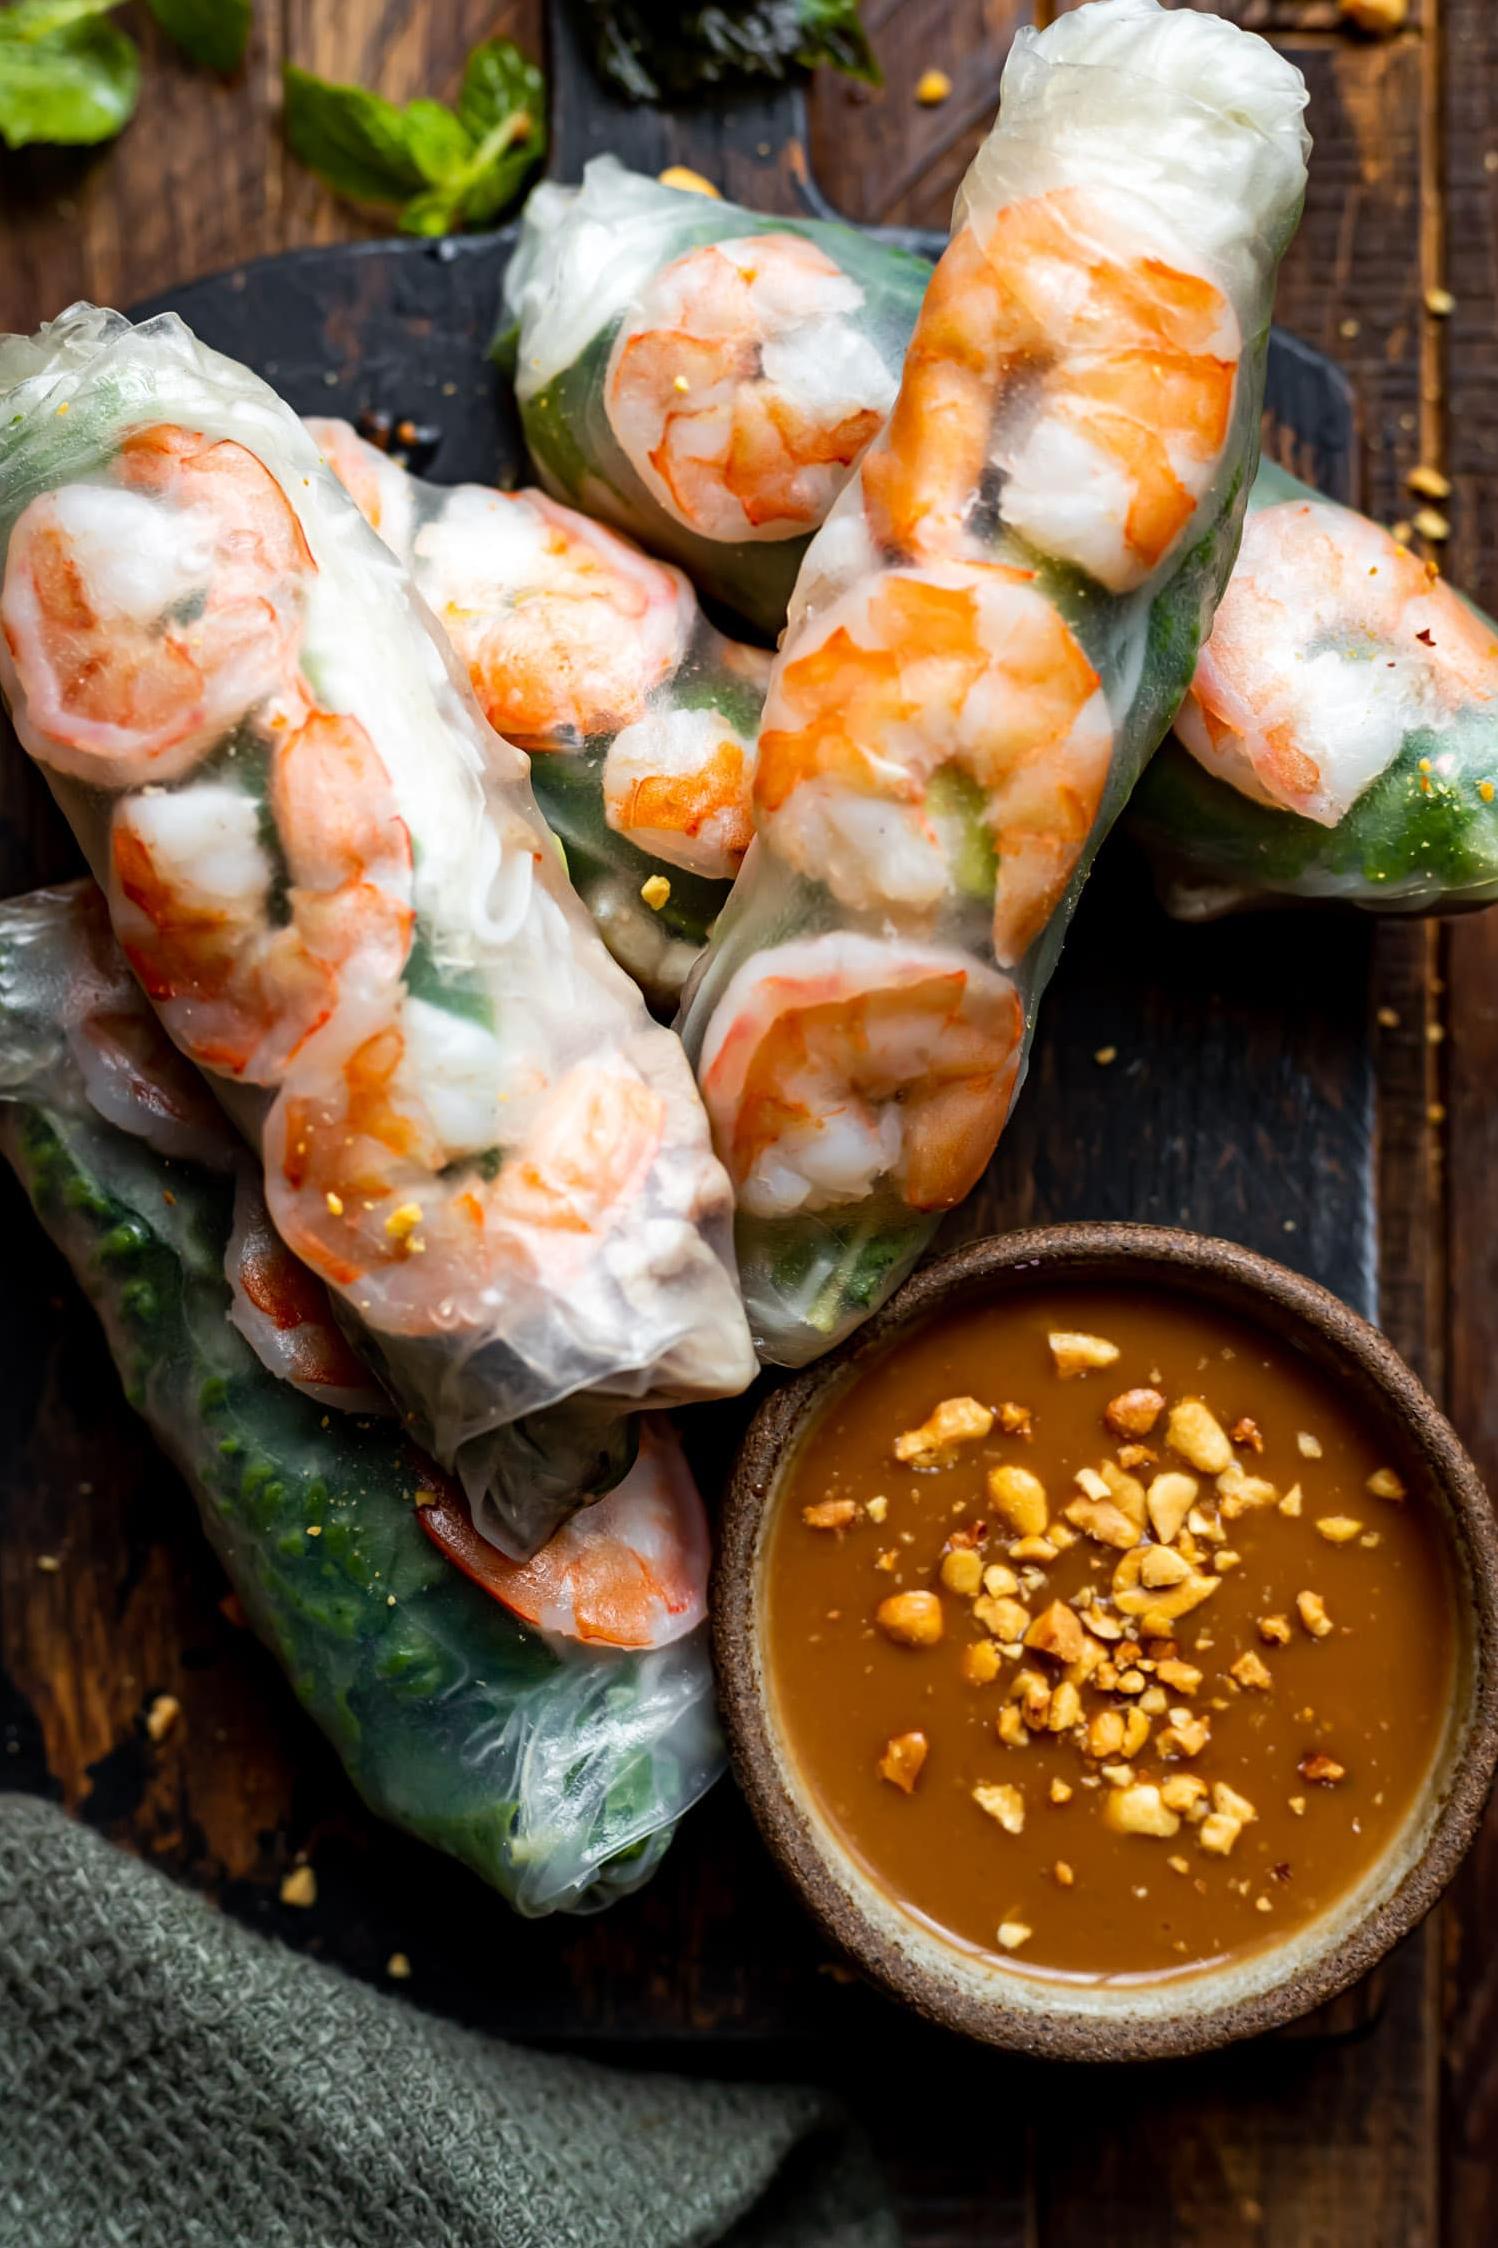  Who says healthy food has to be boring? Our Vietnamese spring rolls are packed with nutrients